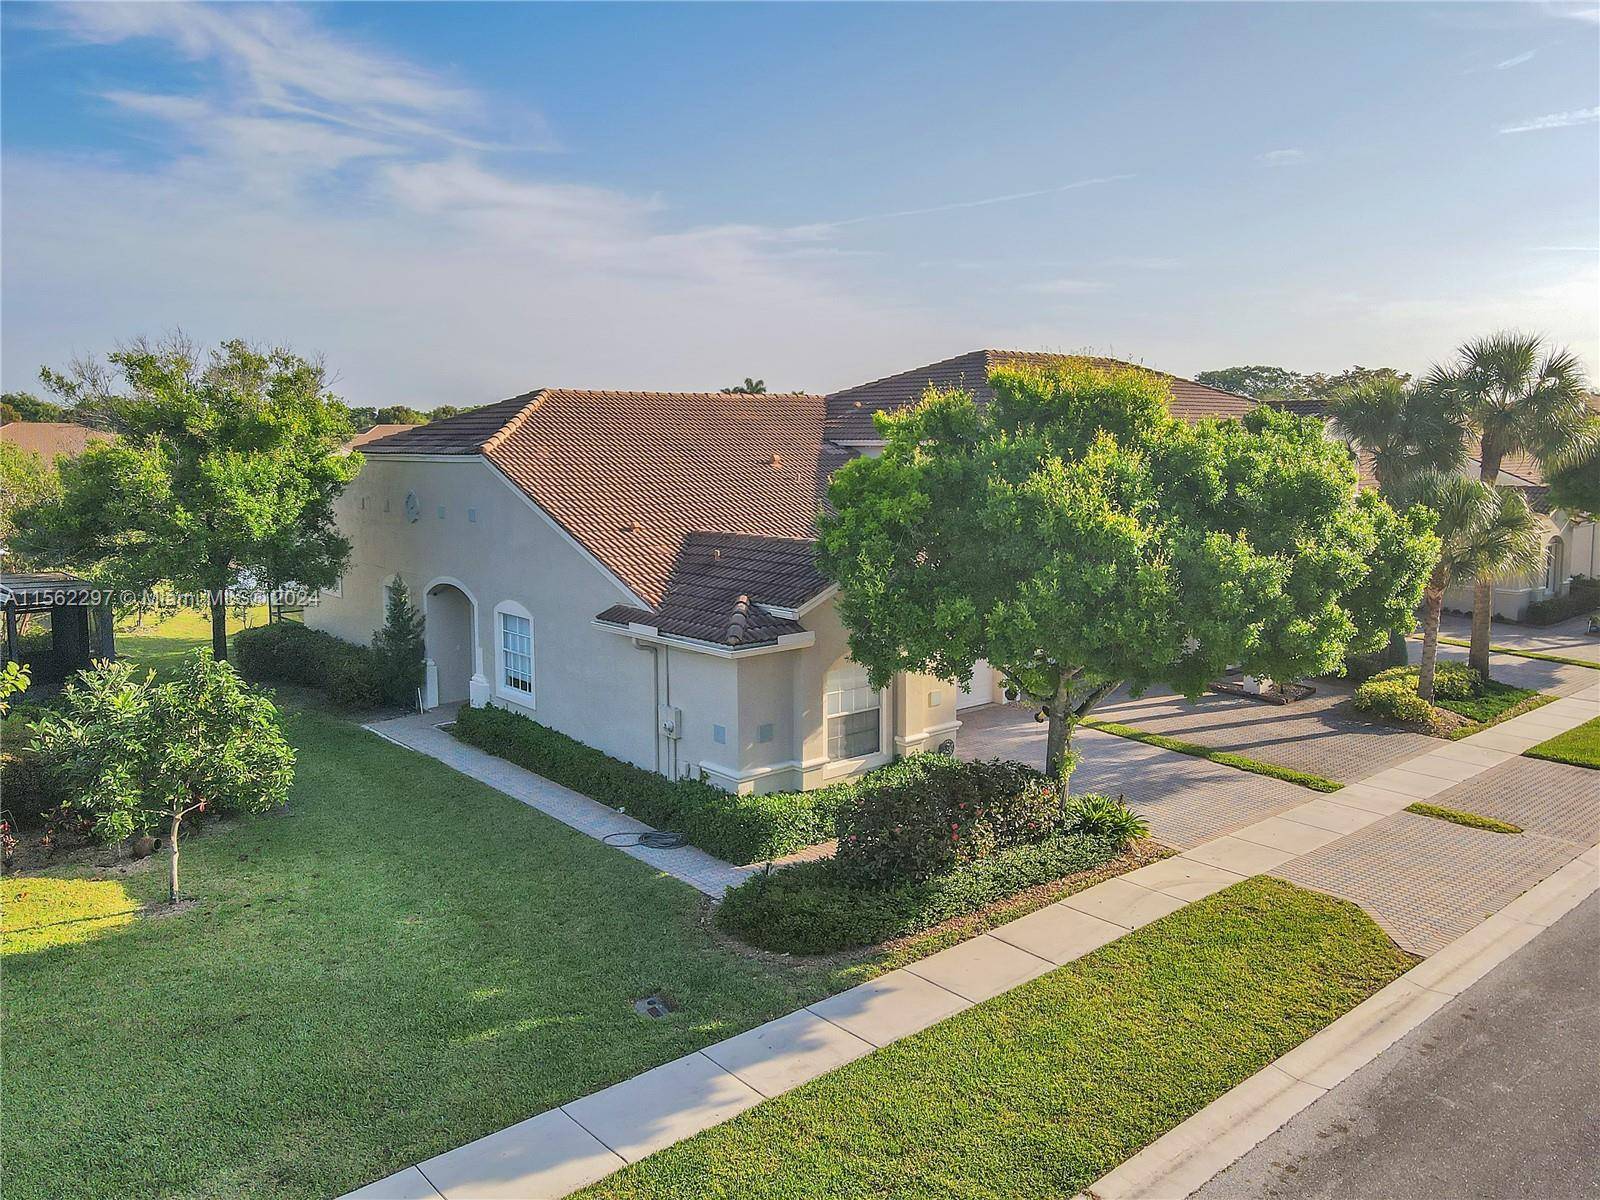 Remarks This beautiful 3 bed 2bath villa in the desirable gated community of Addison Lakes in Boca Raton, FL, offers a serene and luxurious lifestyle.